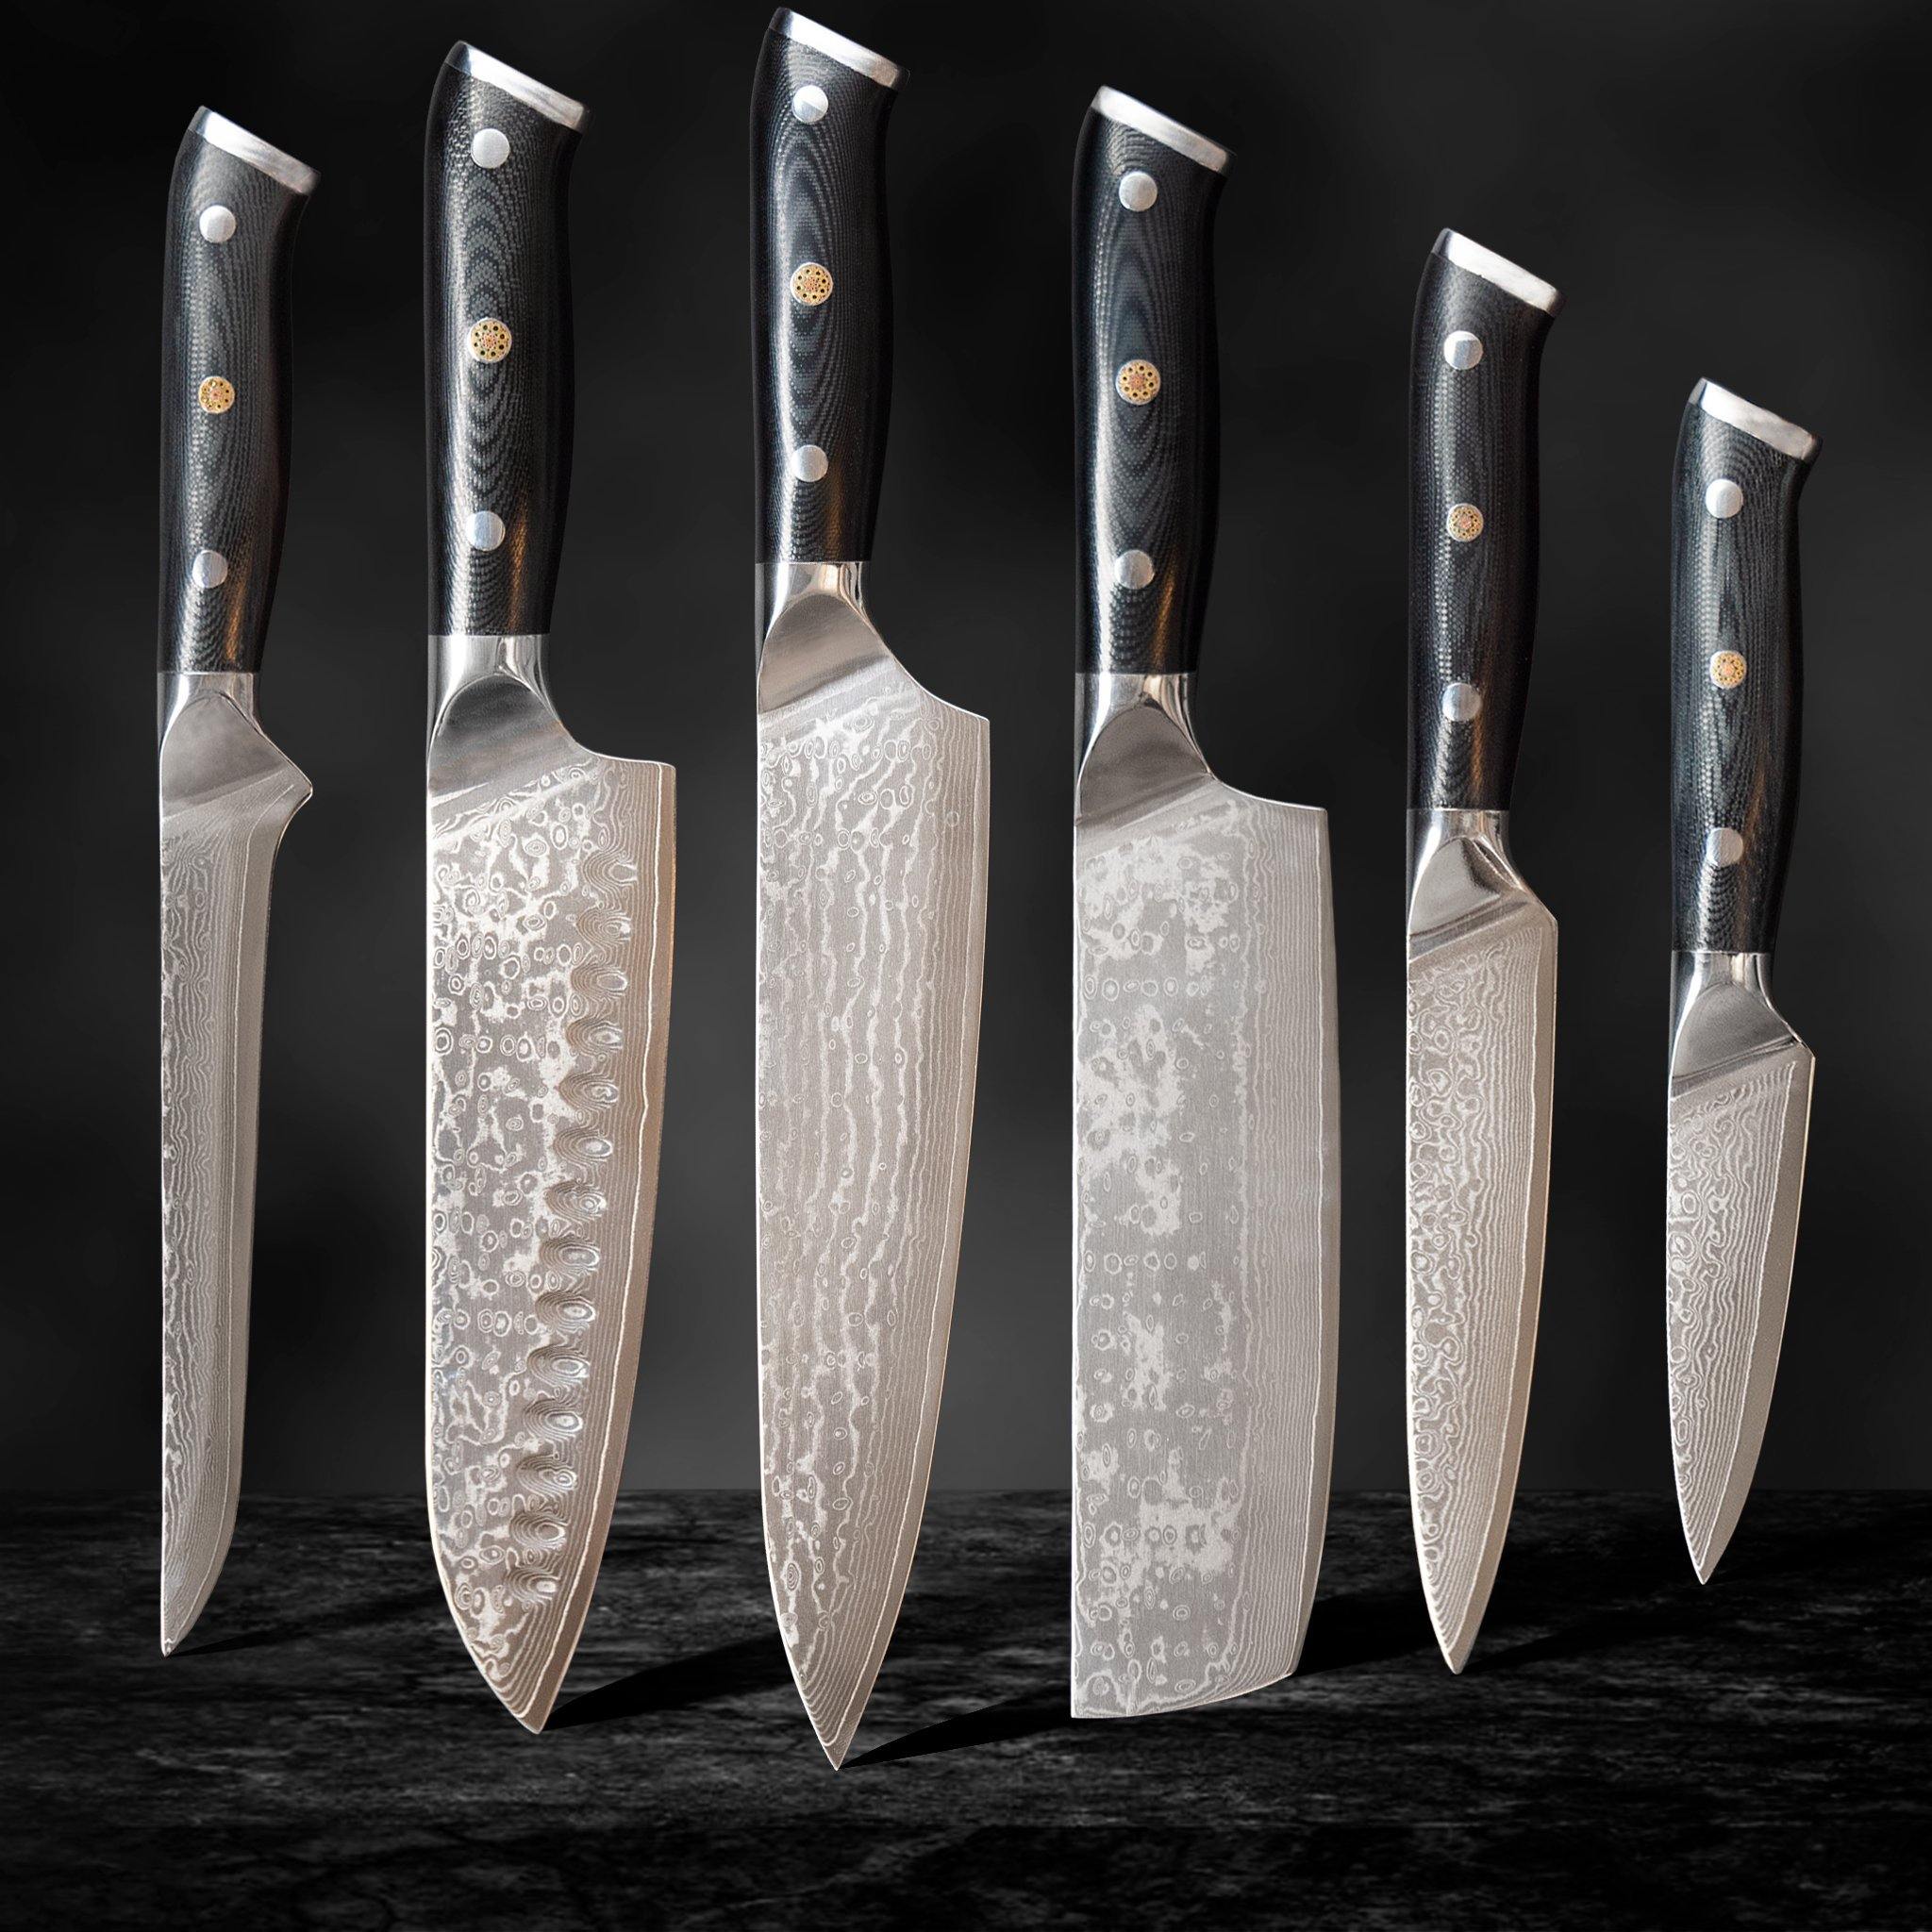  FINDKING Dynasty Series Clad Steel Knives Set of 4